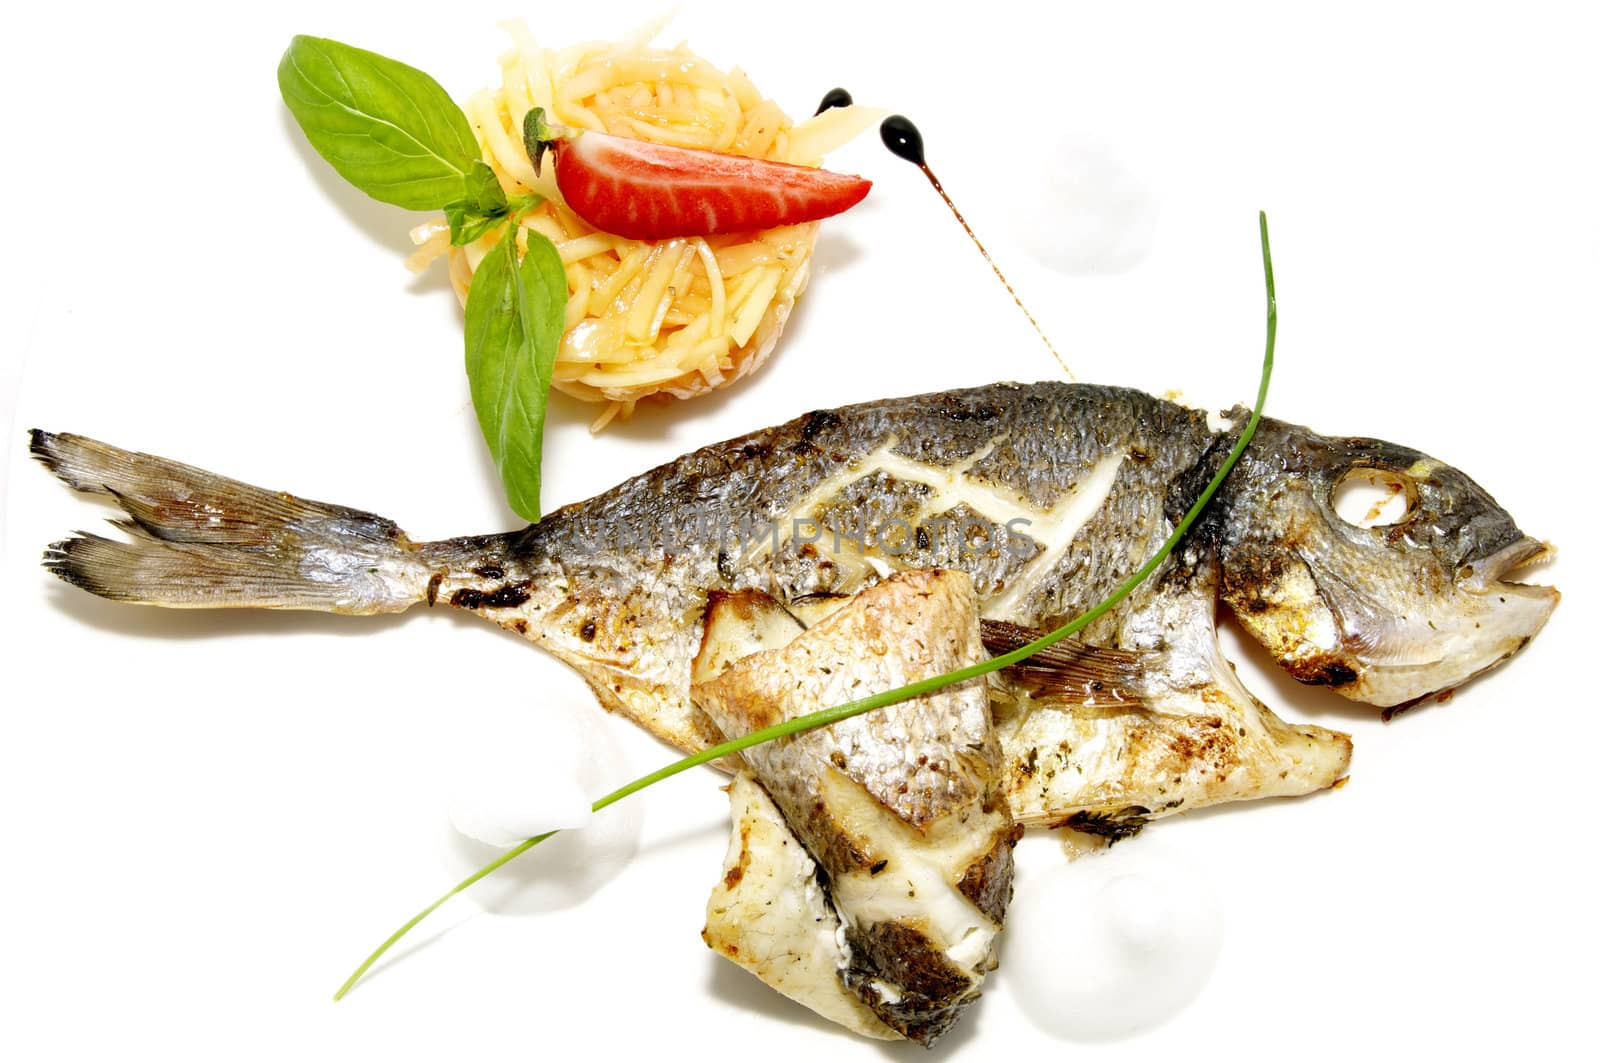 baked fish with vegetables on a white plate